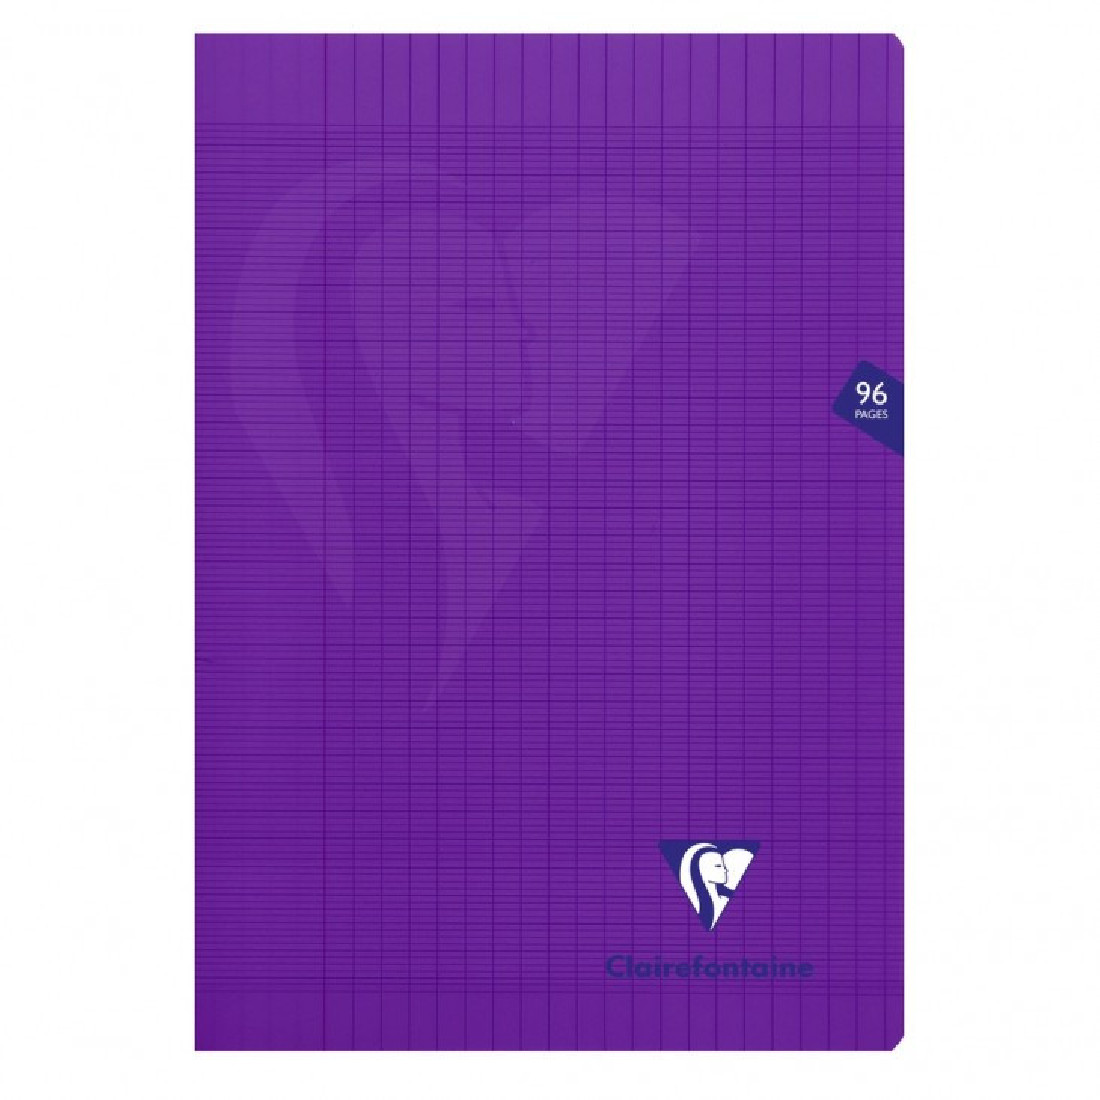 Clairefontaine A4 cahier purple lined with margin 96 pages 90g